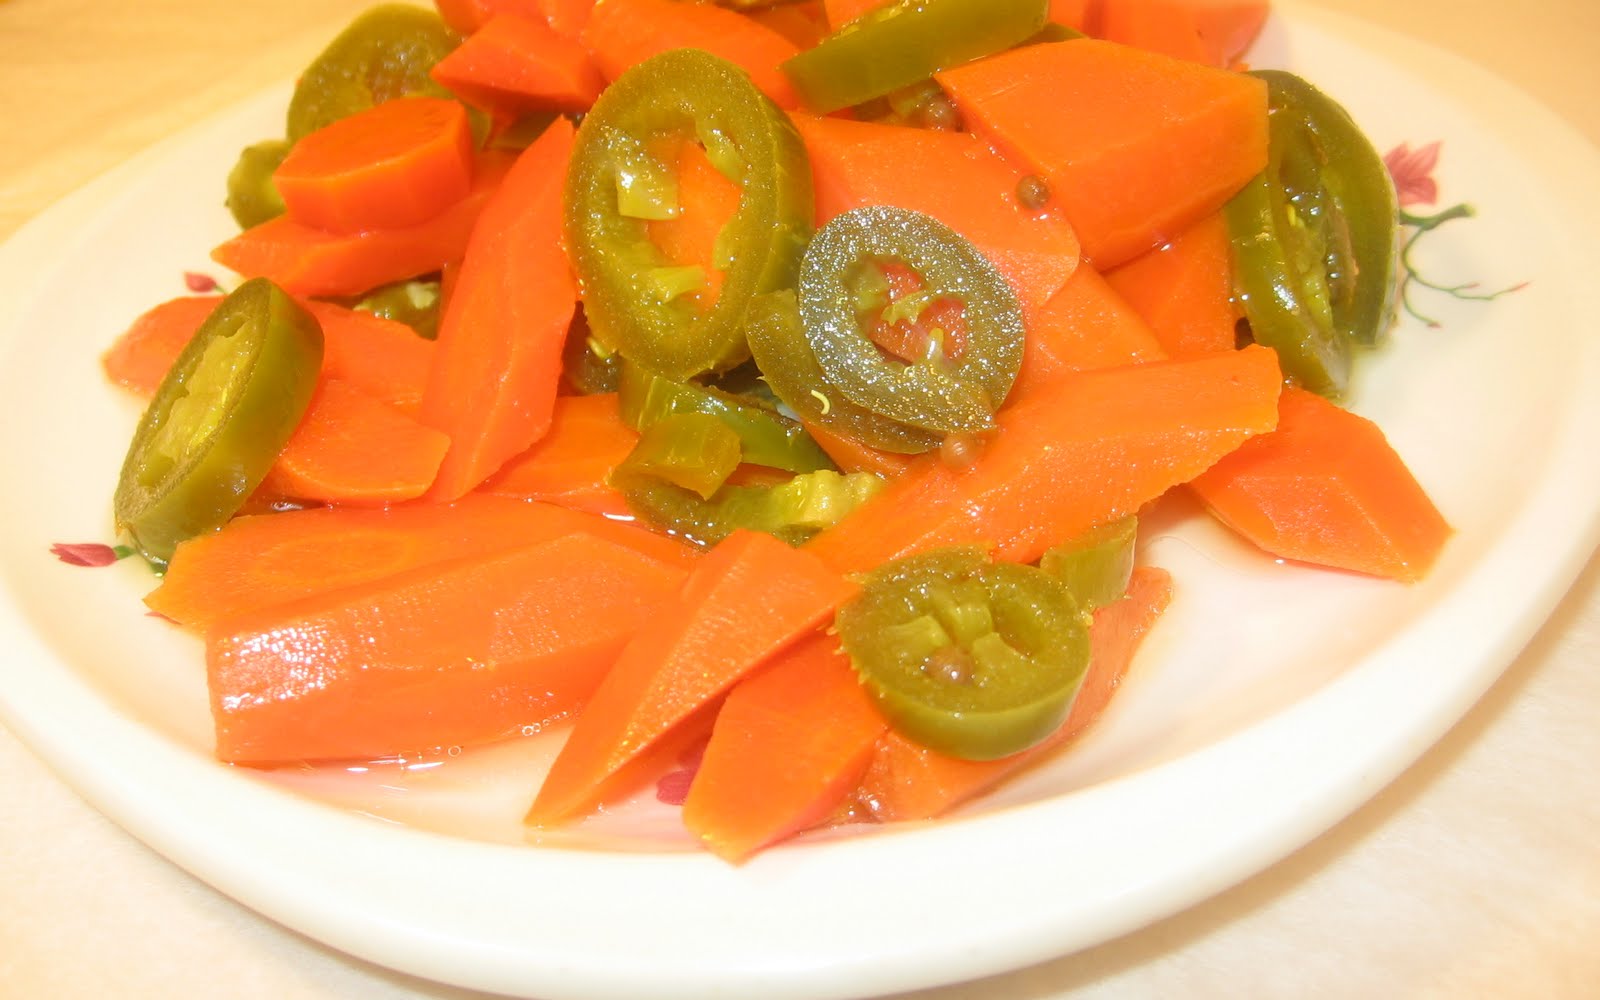 Marinated Jalapenos and Carrots